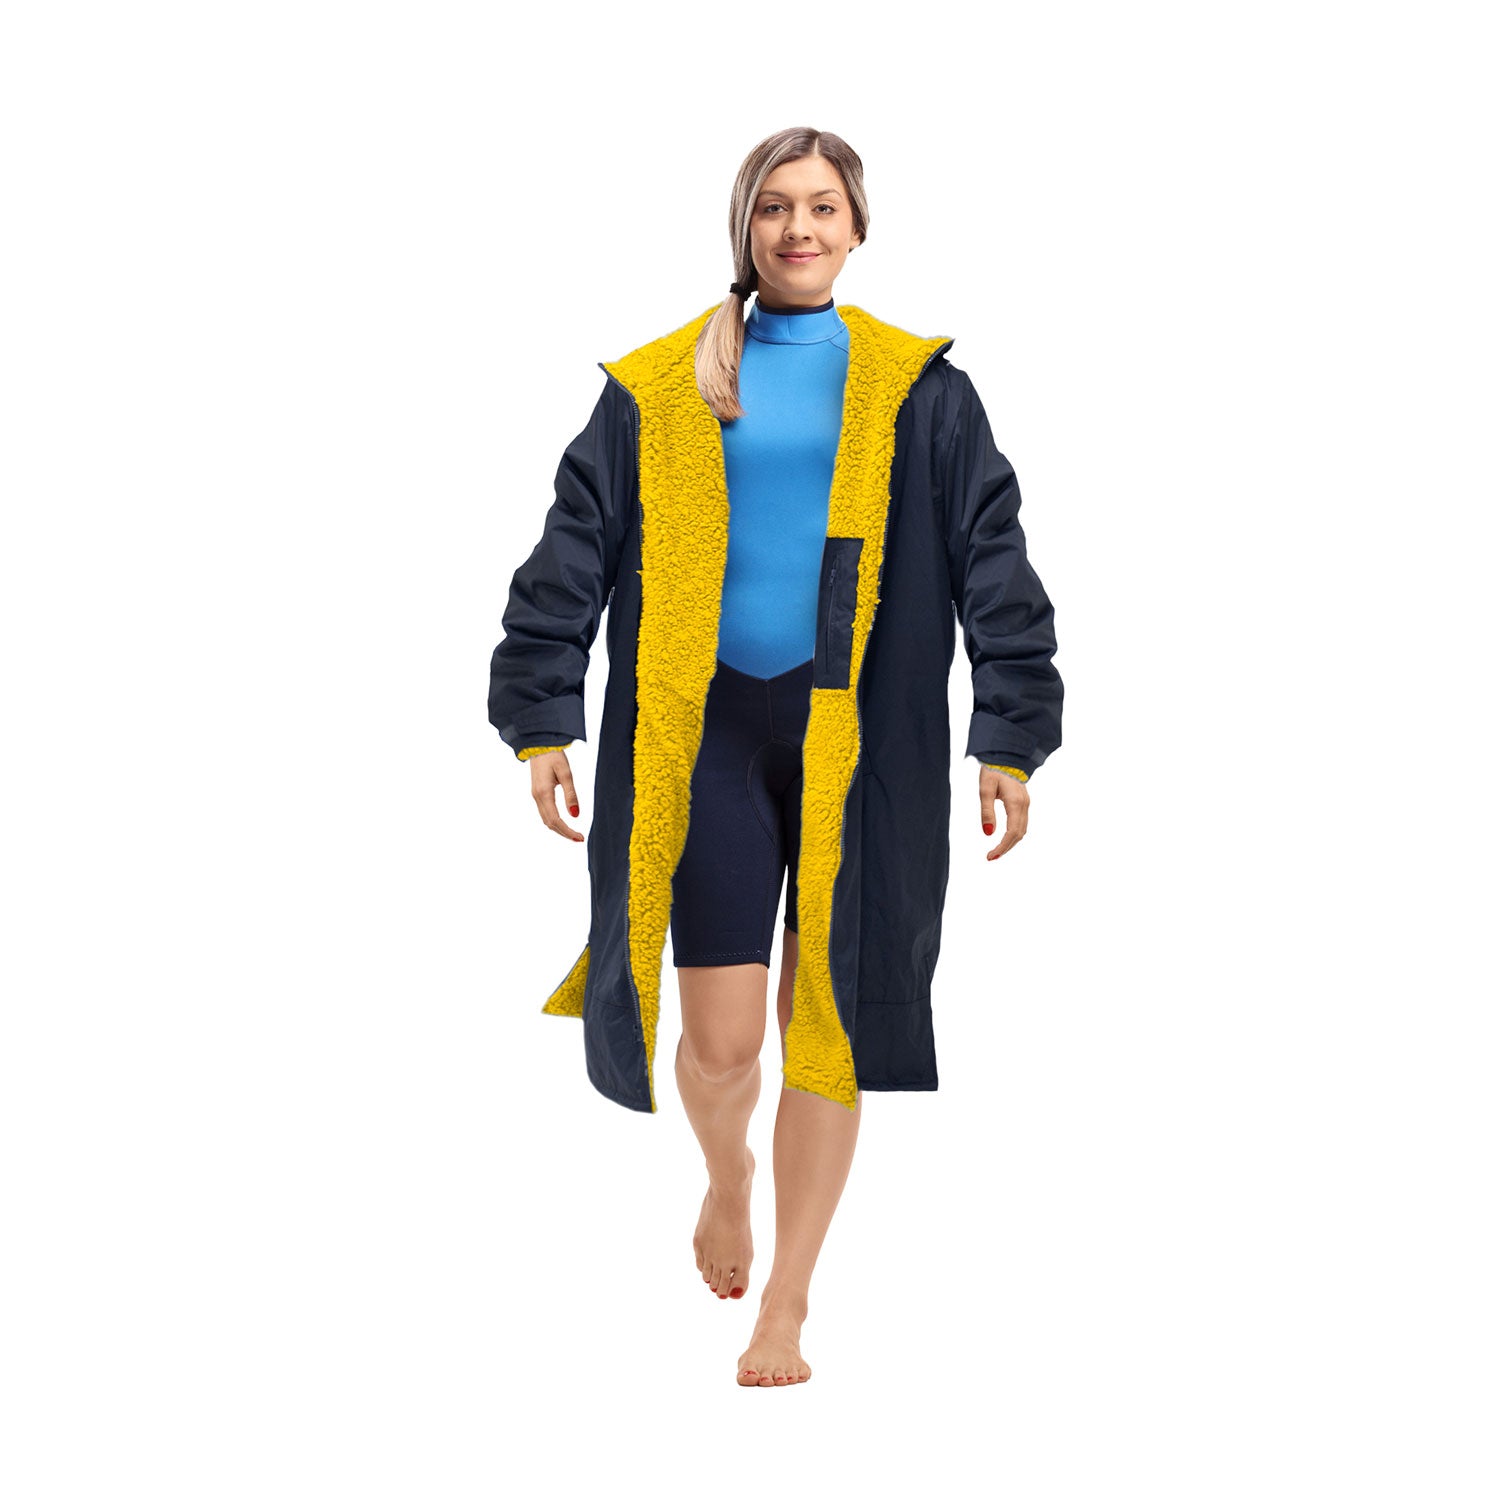 The Home Dry Changing Robe - Navy / Ochre 1 Shaws Department Stores